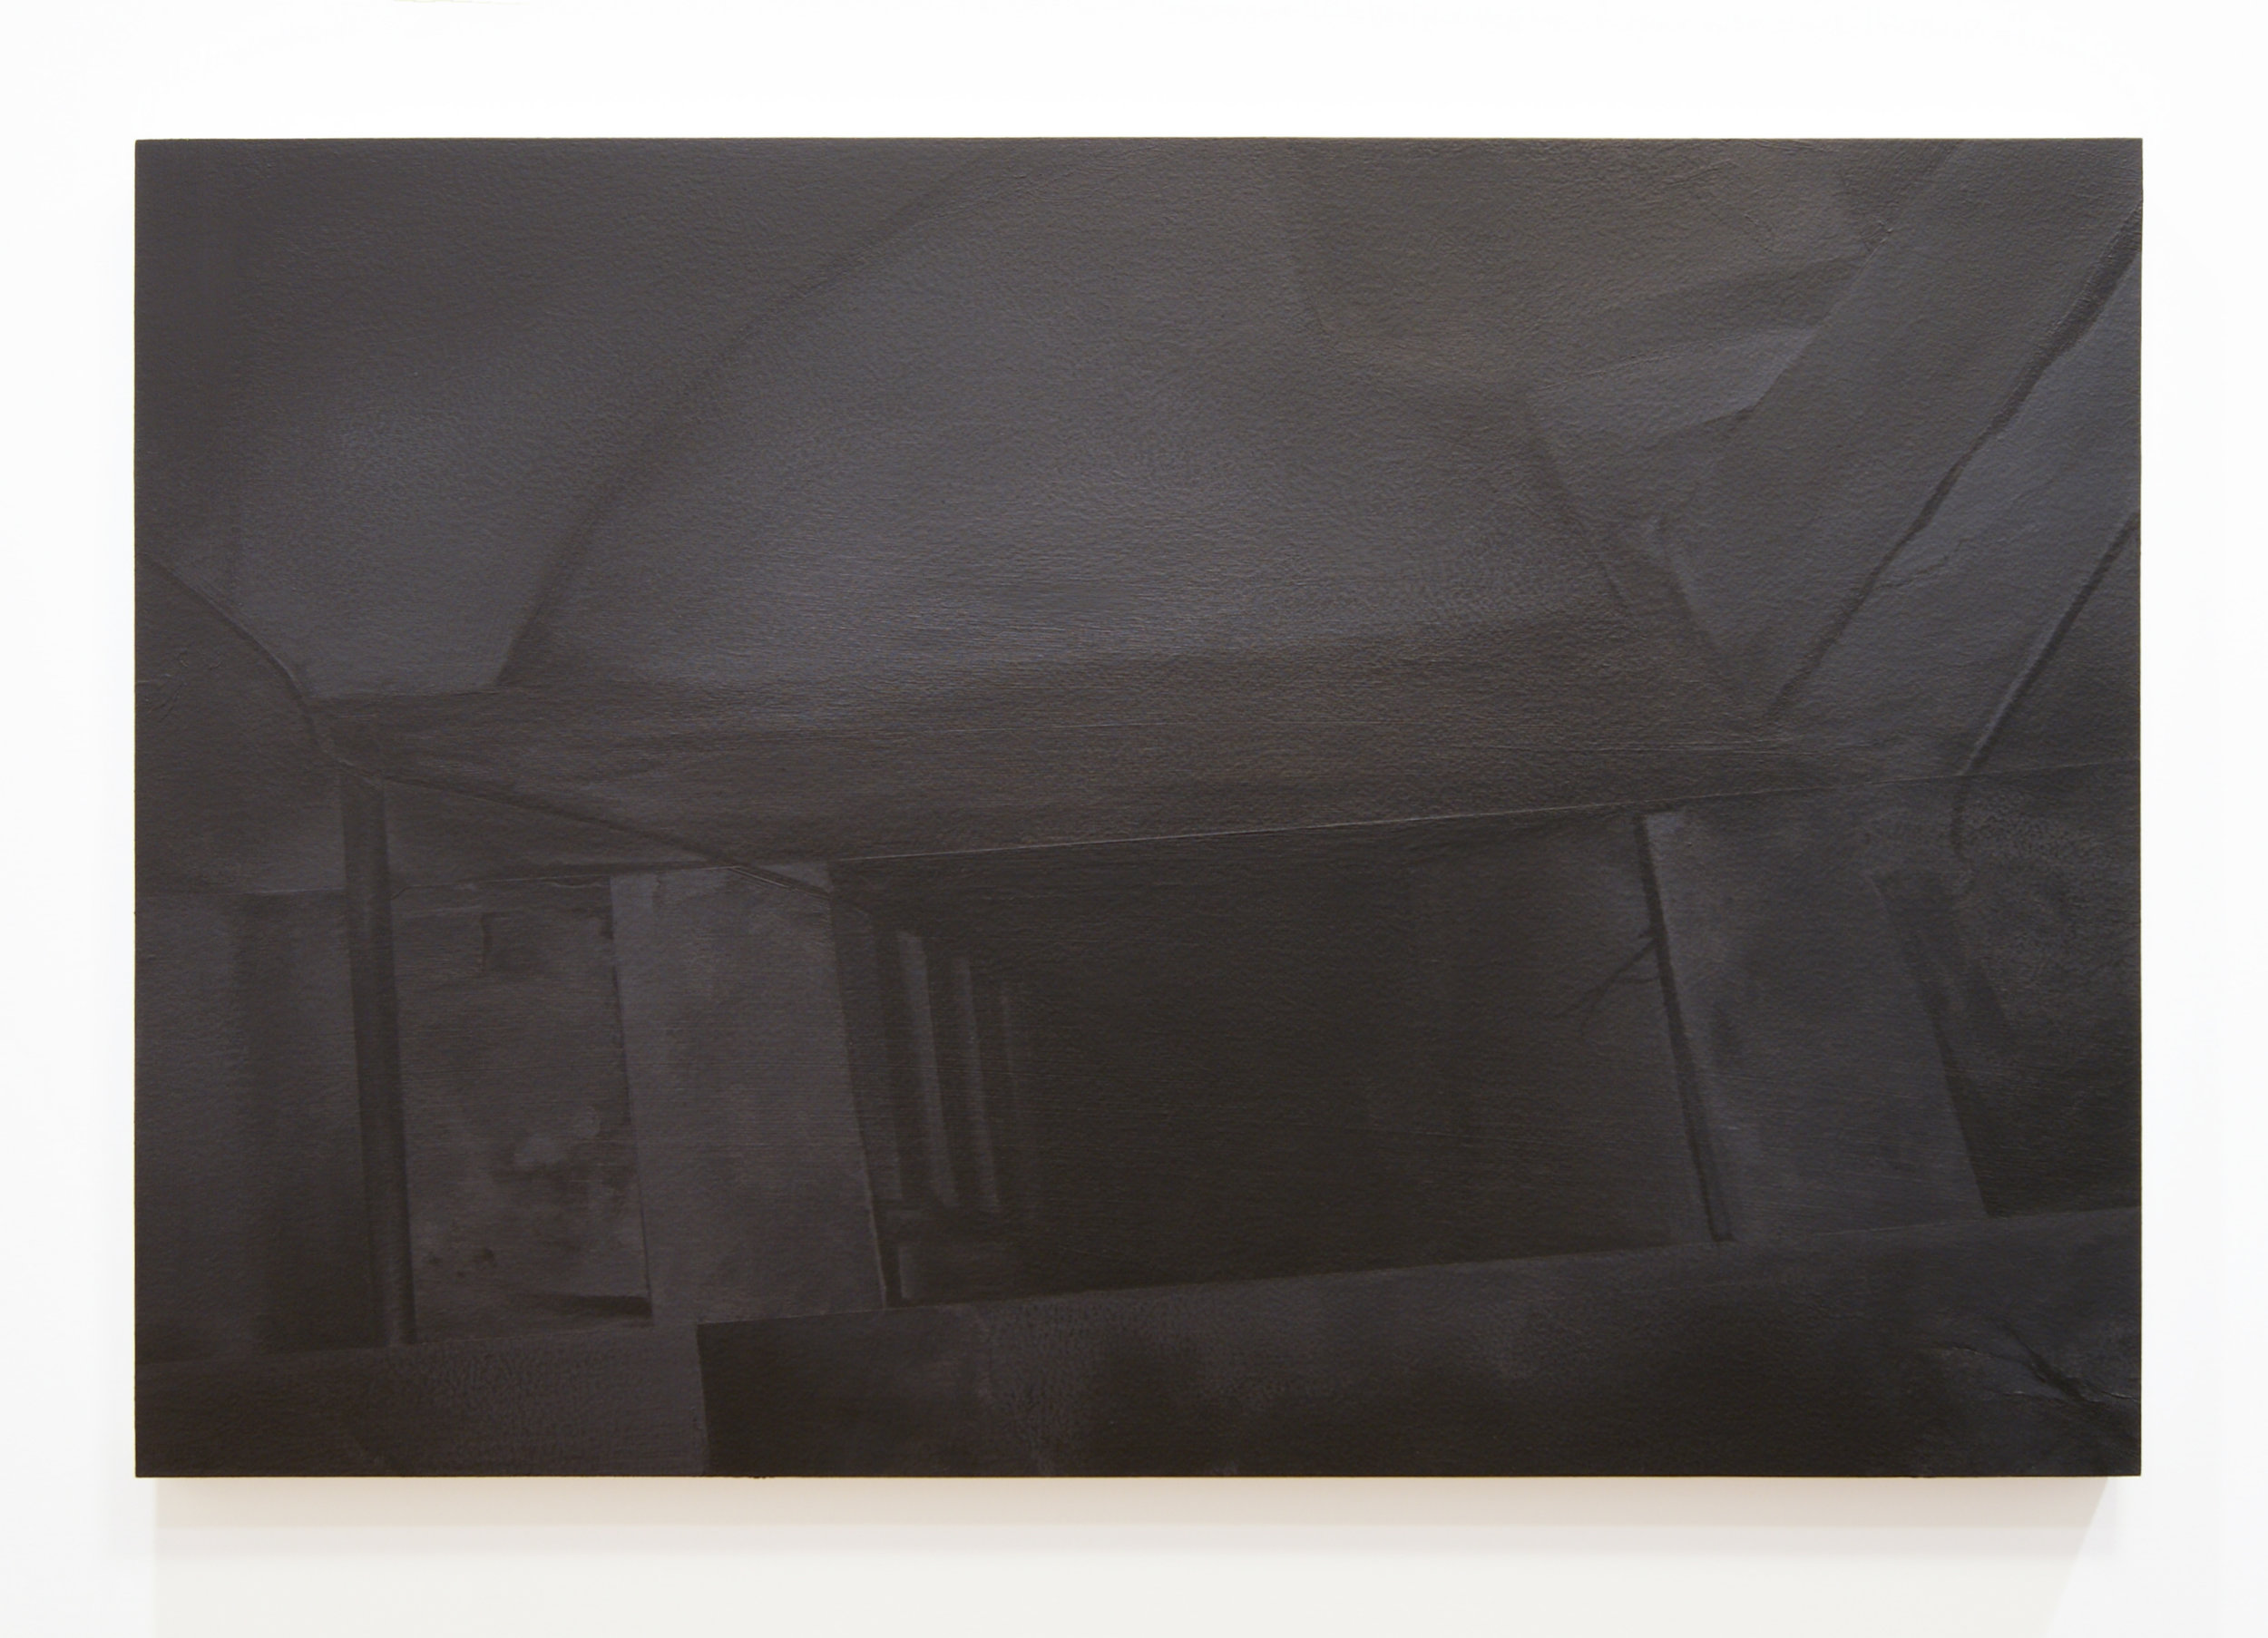  Hideout, 2015  Acrylic on panel, 24 x 36 inches 